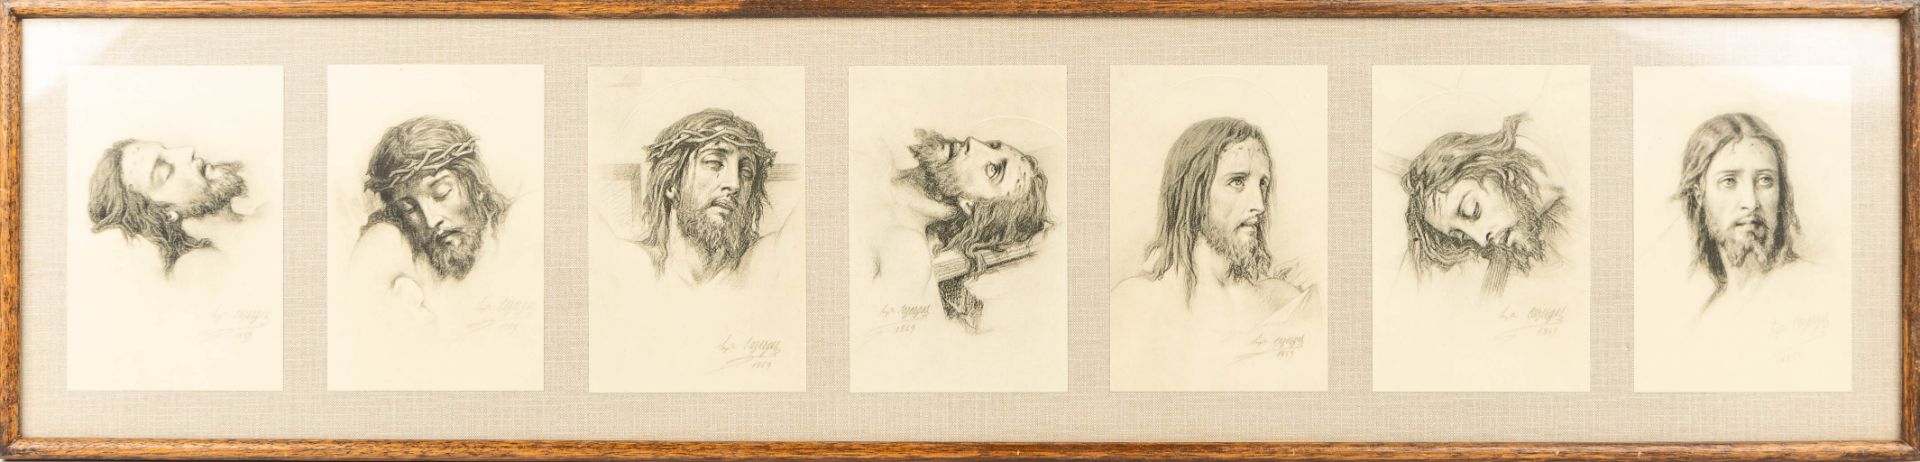 Hippolyte LAZERGES (1817-1887) a 14 piece station of the cross, 'The Face of Christ, 1869'. (H:21cm) - Image 16 of 20